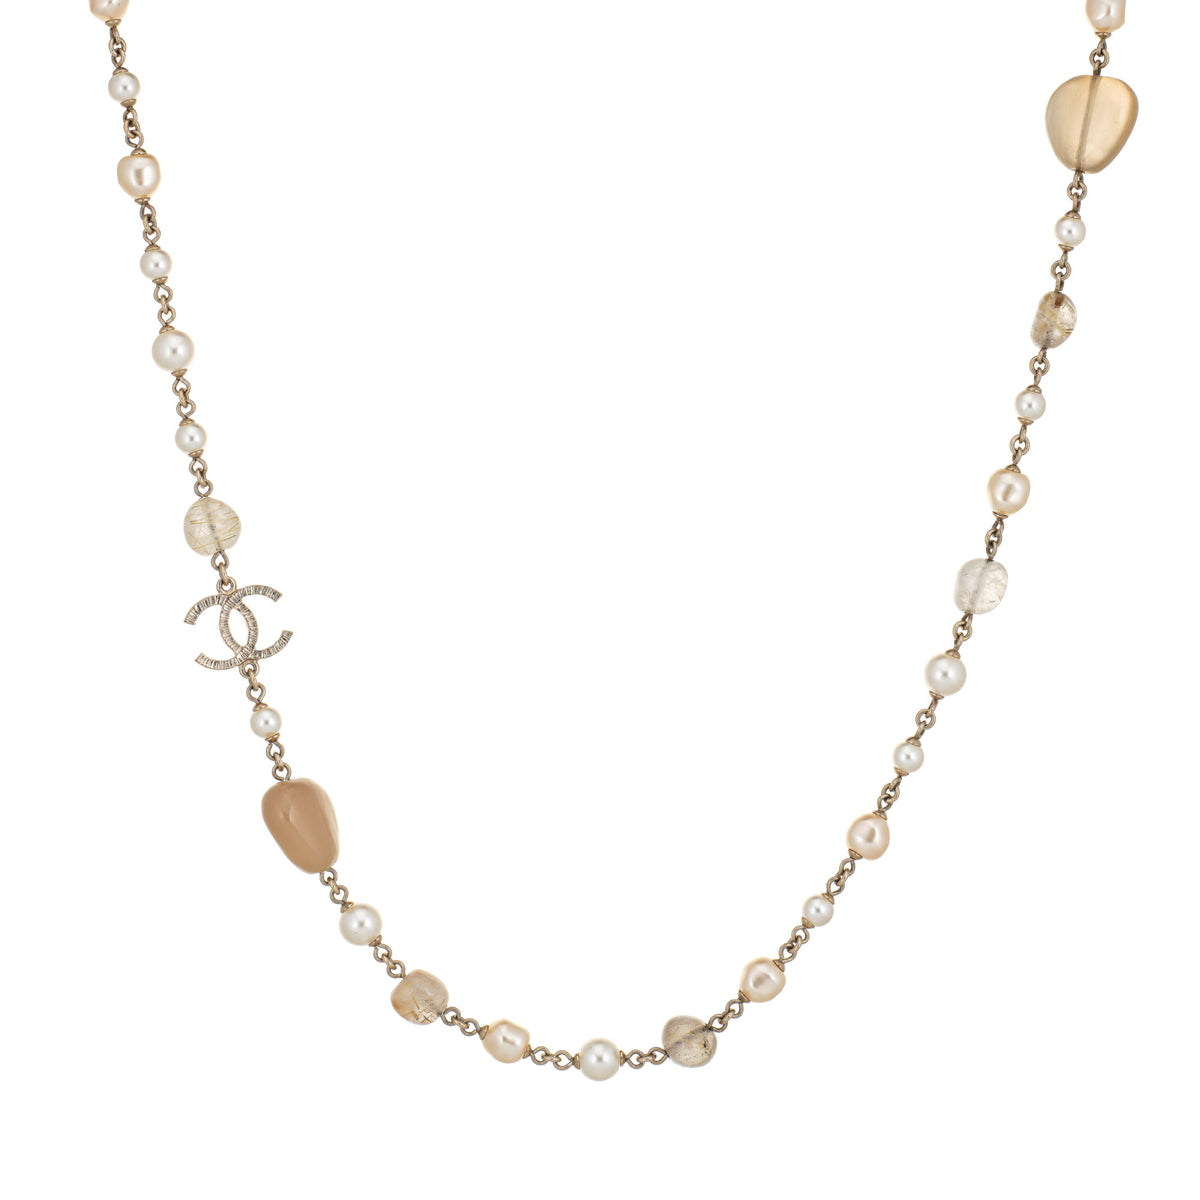 Chanel Pre-Owned Cc Faux Pearl Necklace in Metallic